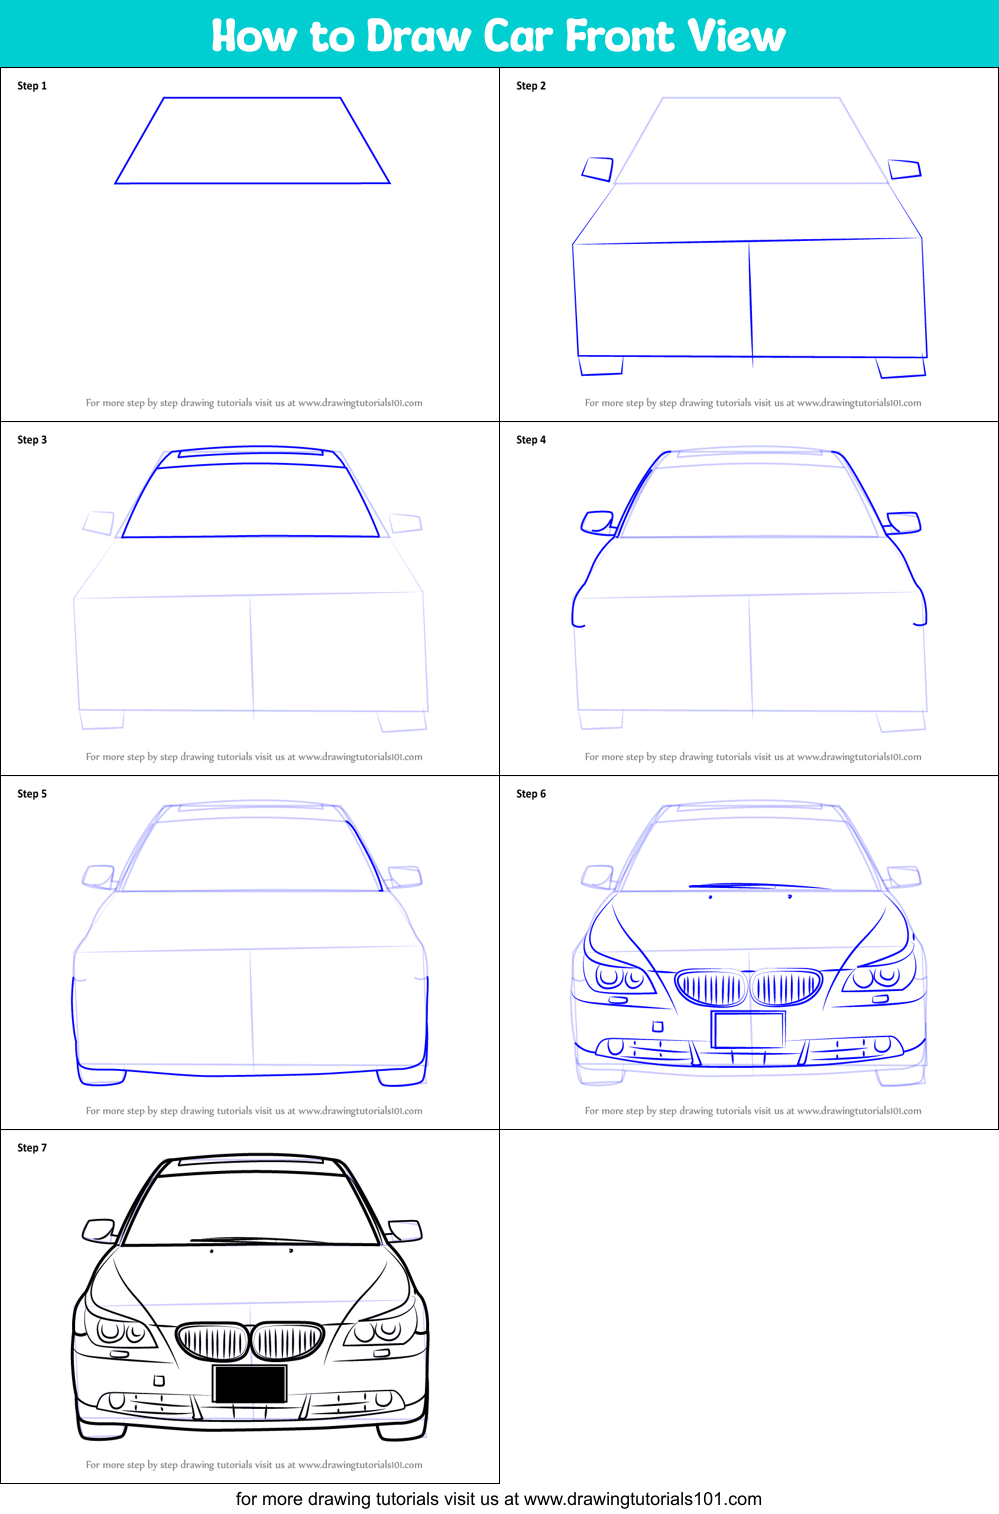 How to Draw Car Front View printable step by step drawing sheet